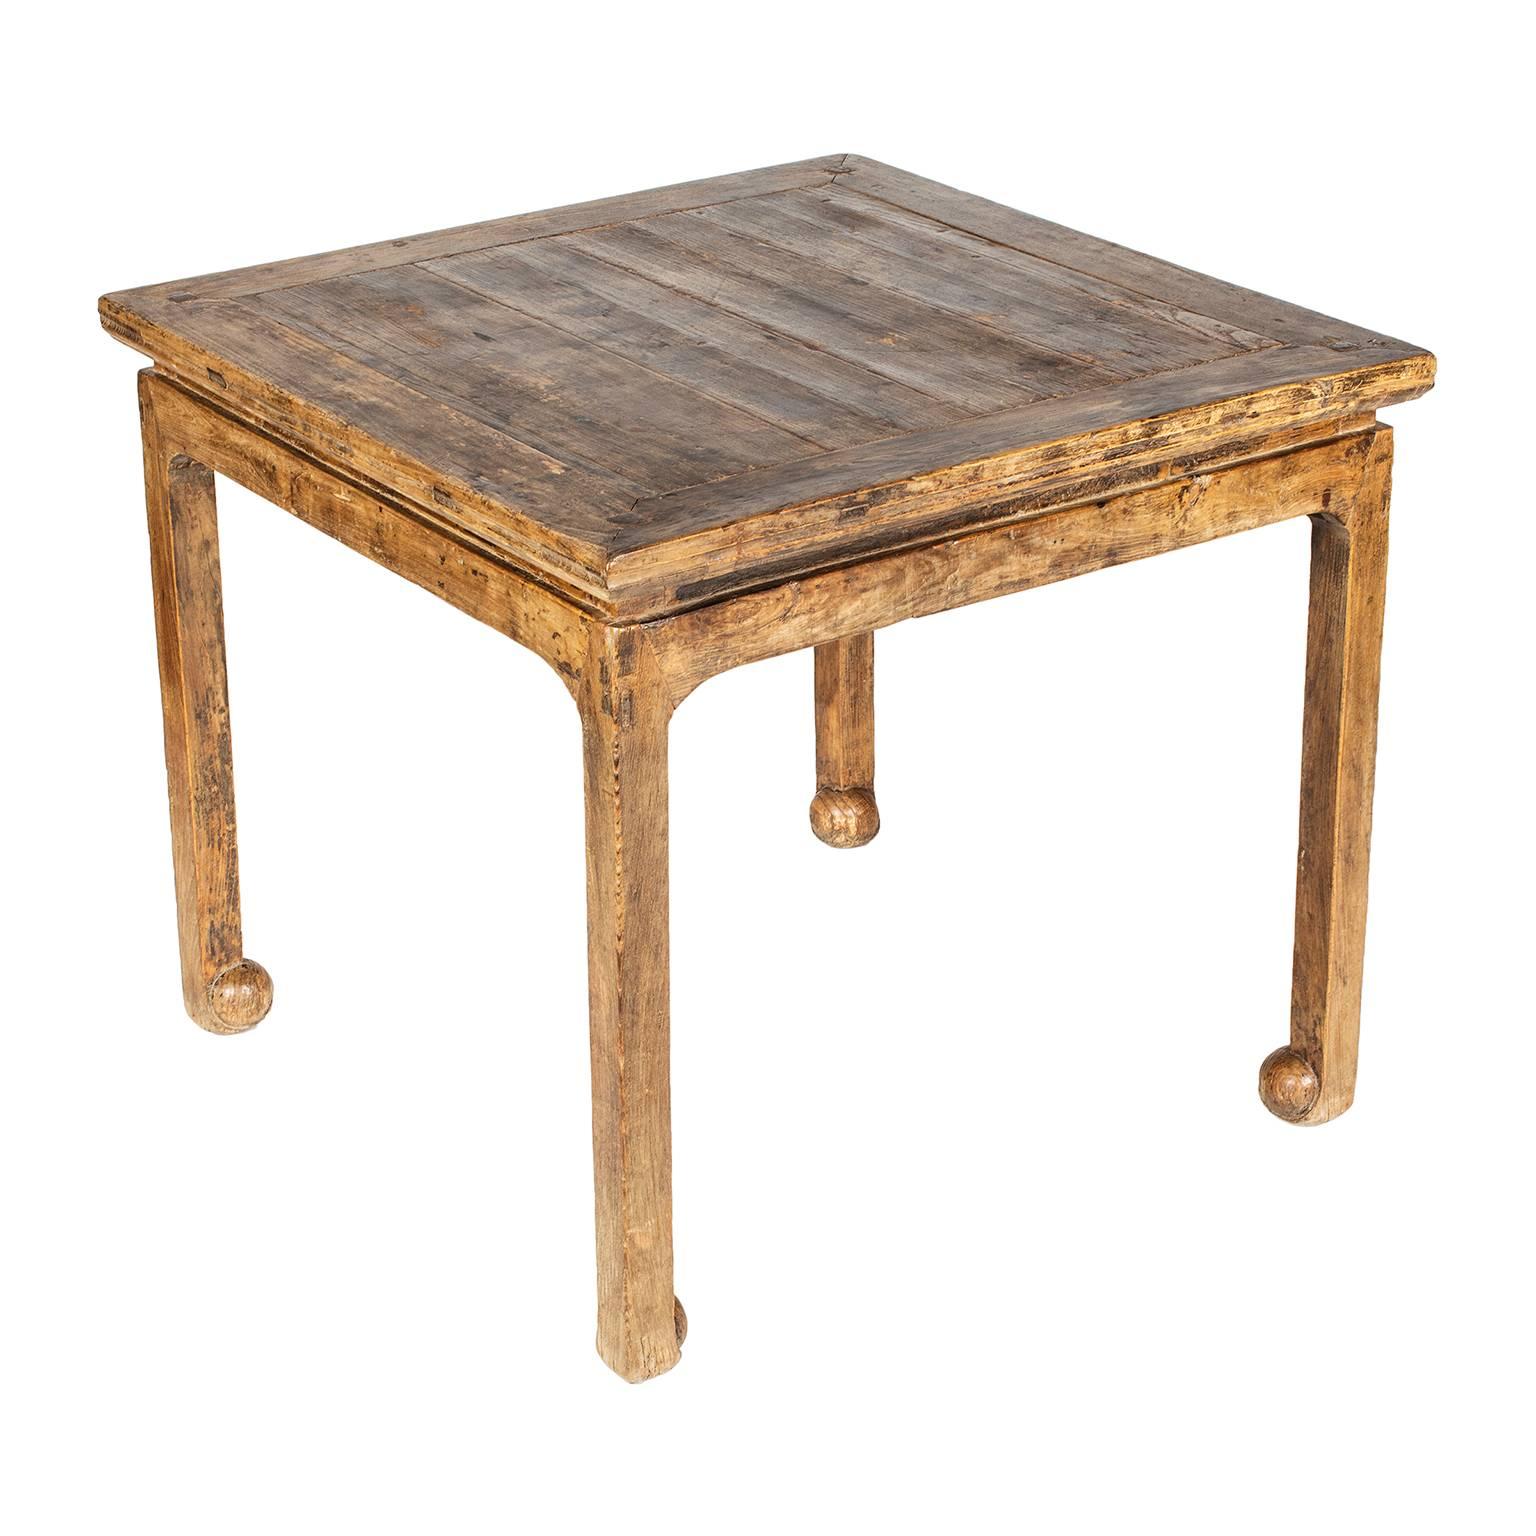 This exquisitely carved table has subtle features that beautifully exemplify Chinese furniture design from the late Ming period: The simplicity of line, overall form and complex joinery. Unusual about this table is the way the feet scroll inward and